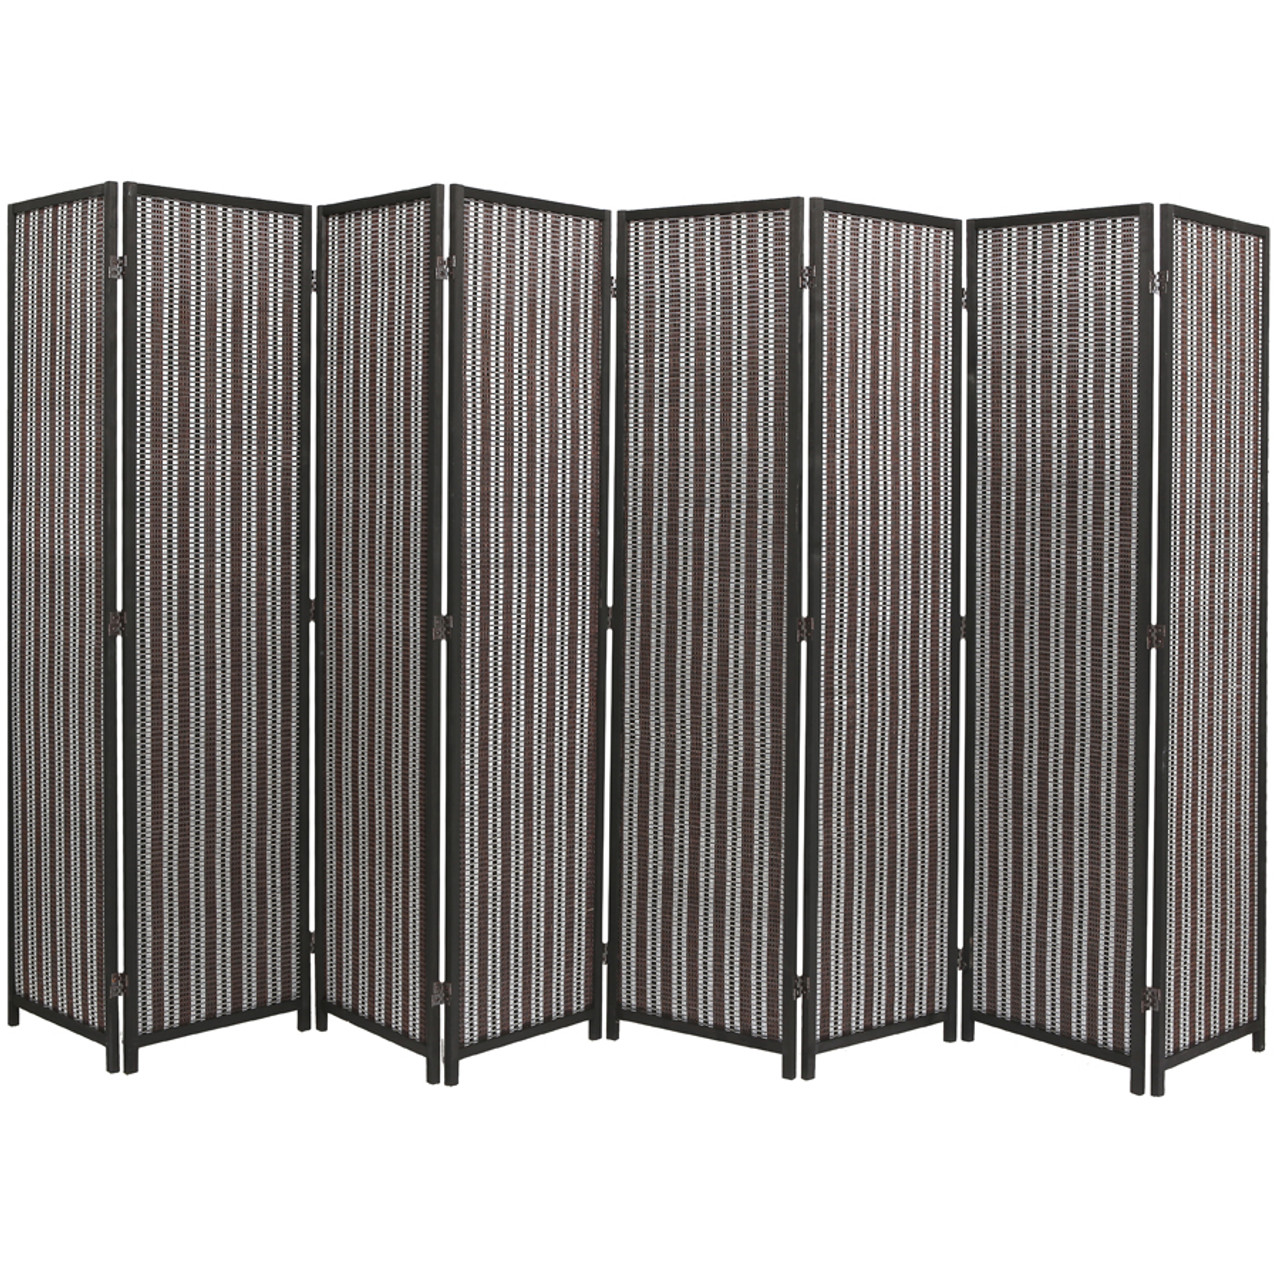 8 Panel Natural, Brown, Or Black Color Wood and Bamboo Weave Room Divider